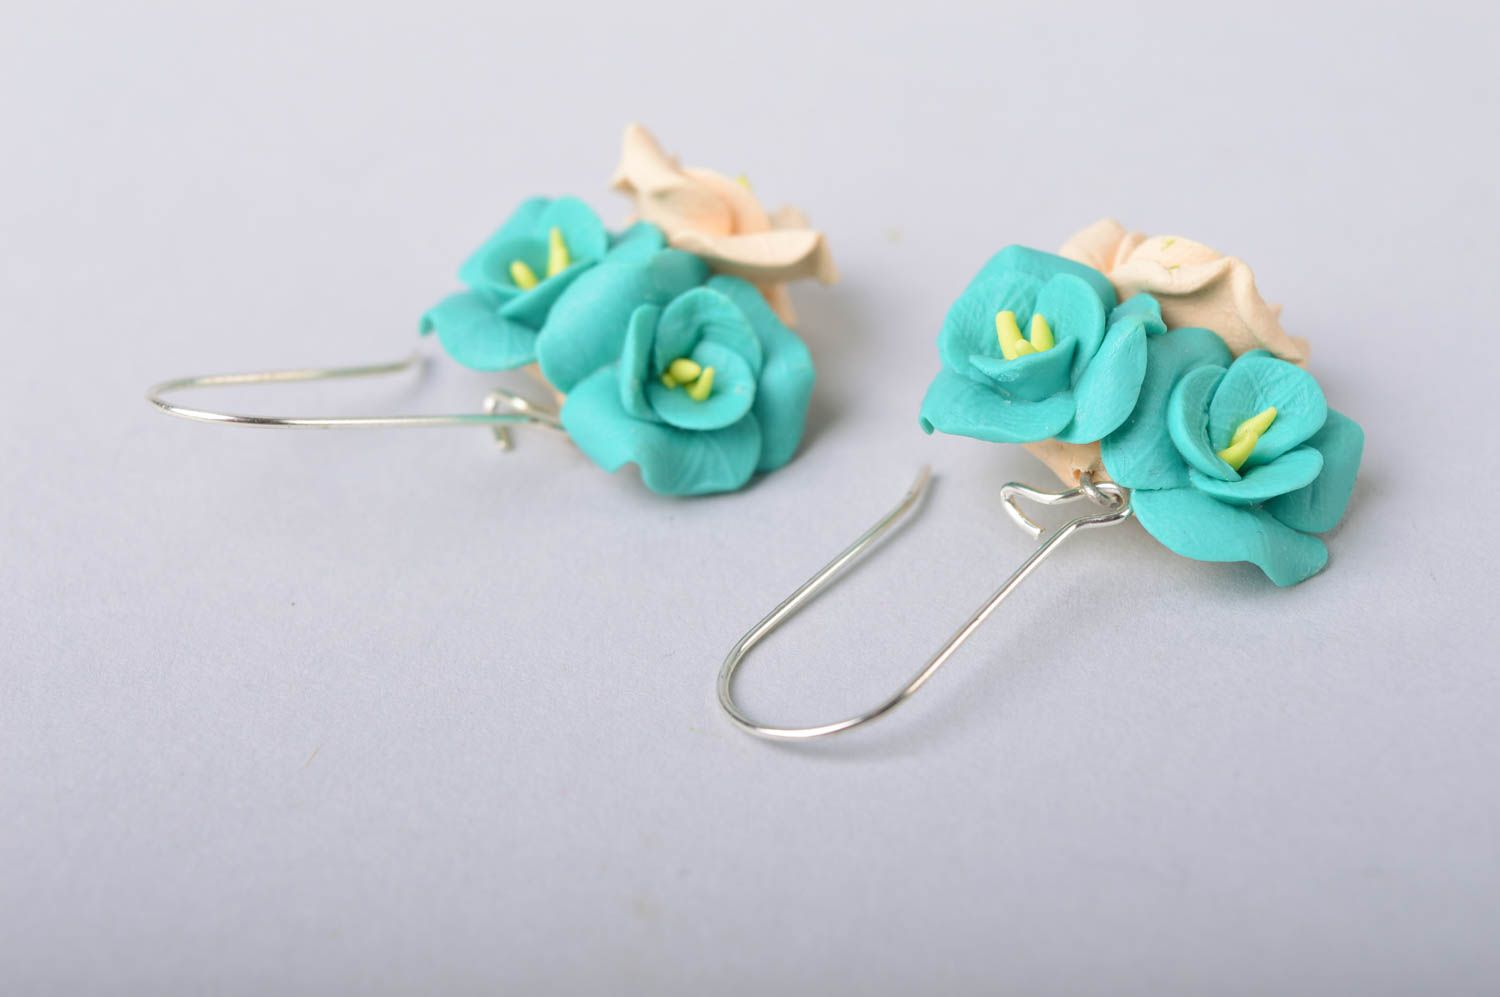 Handmade earrings with charms made of cold porcelain in pastel shades  photo 5